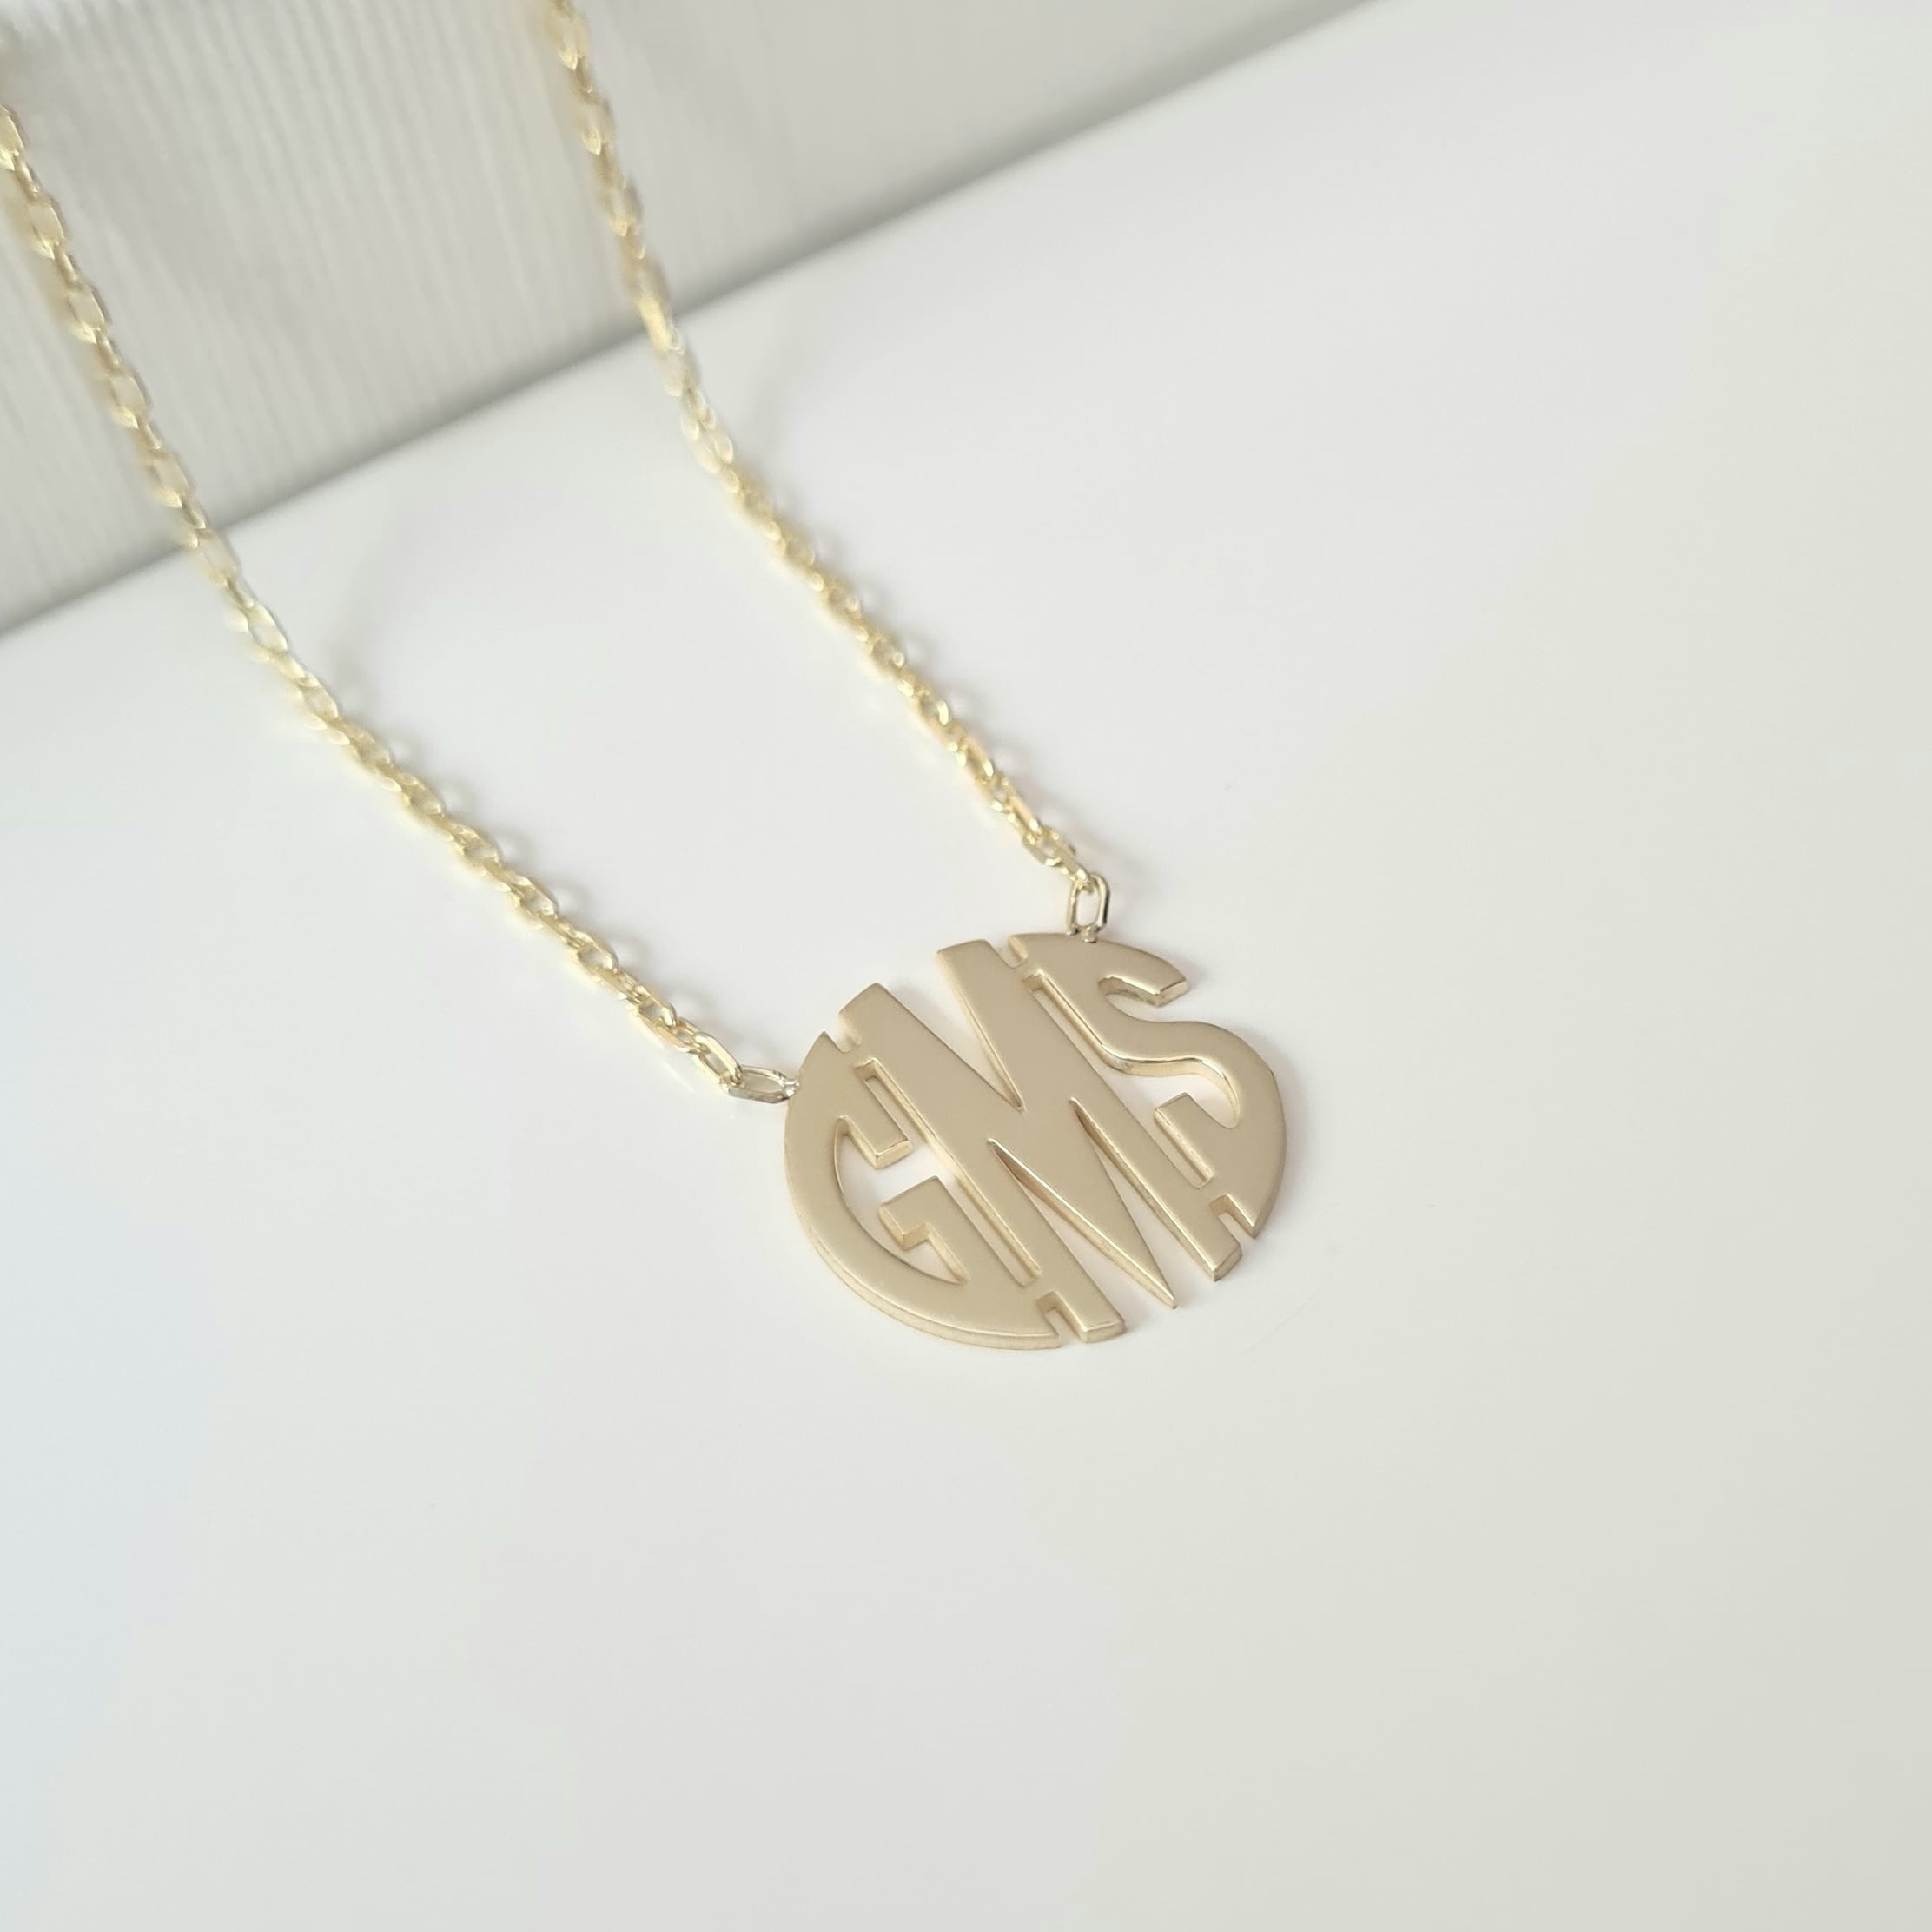 Initial Pendant Three Discs Gold Sterling Silver Custom Letter Personalized Monogram Necklace Chain